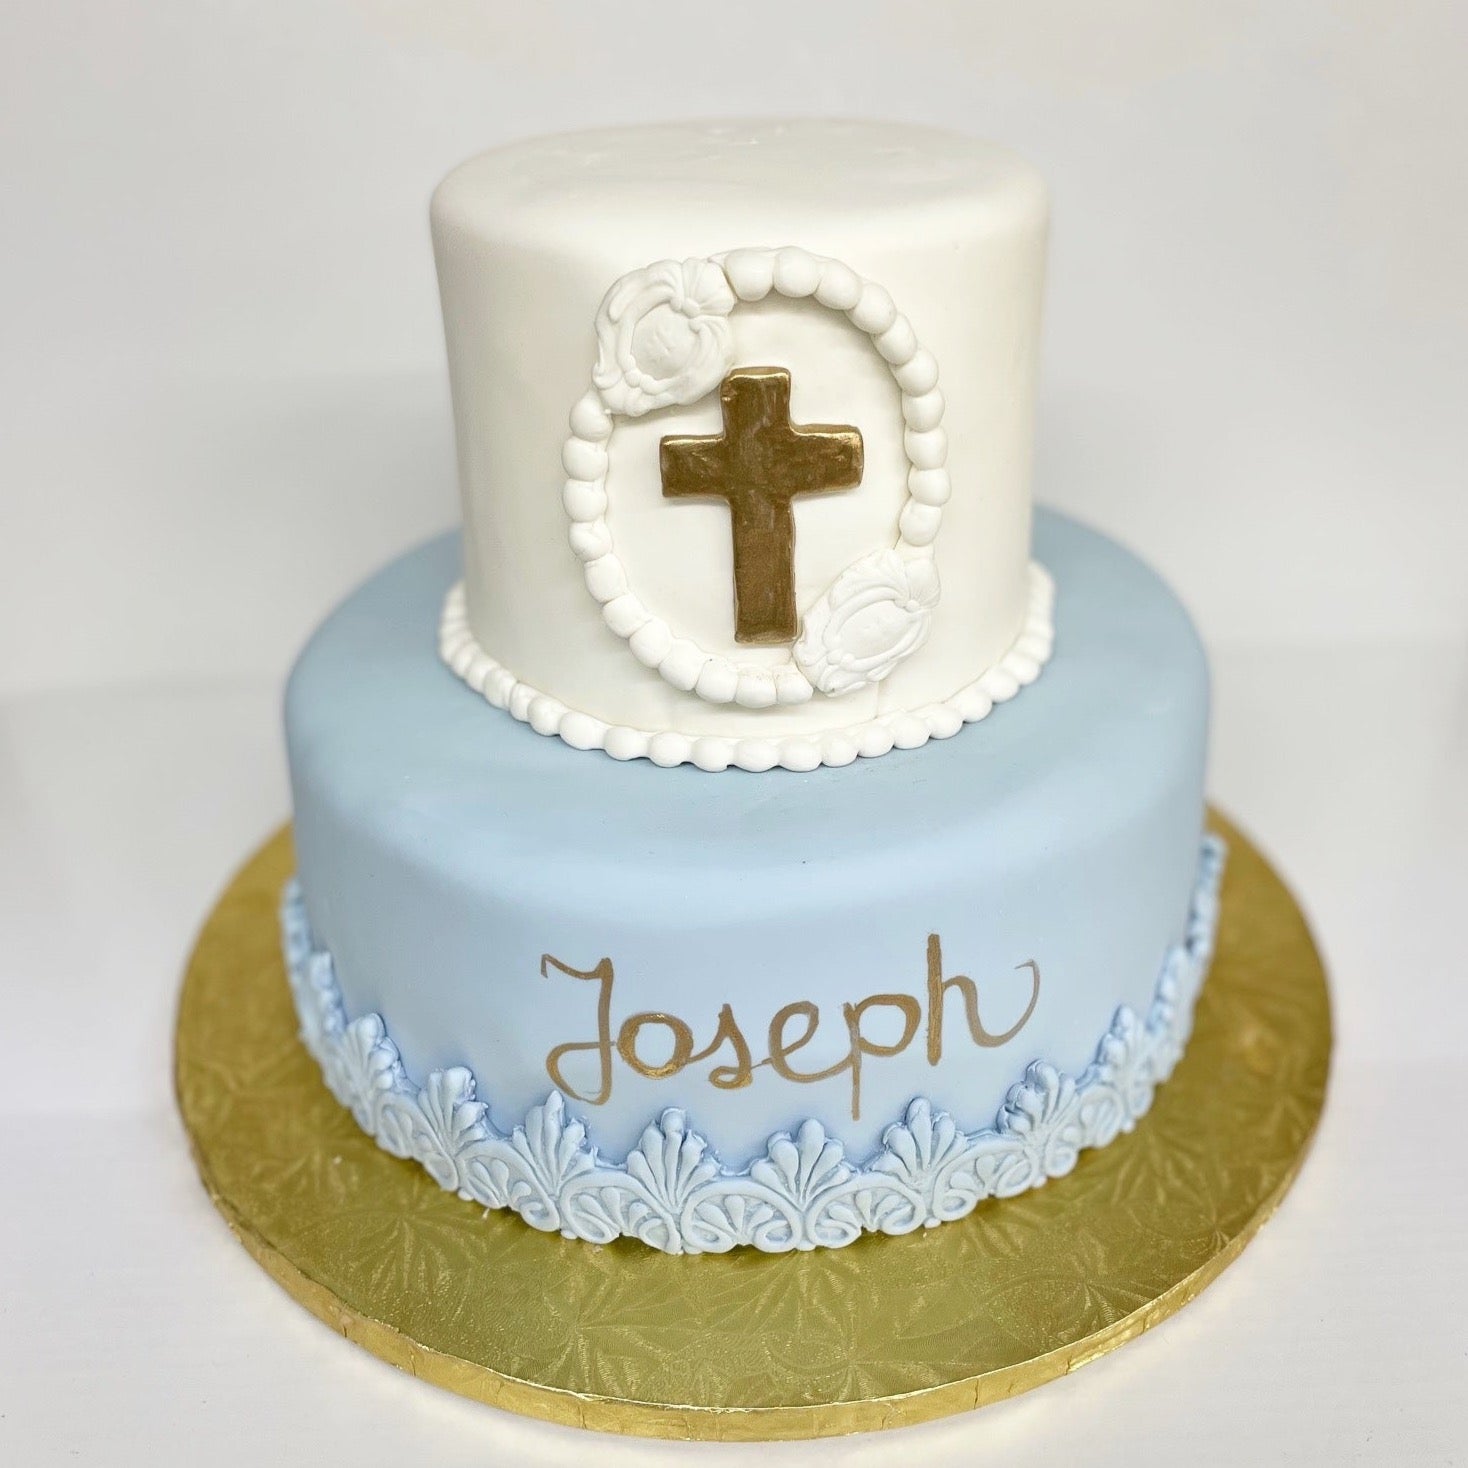 Holy Bible Cake Topper - Religious Cake Tutorial - Cake Decorating Video by  Caketastic Cakes - YouTube